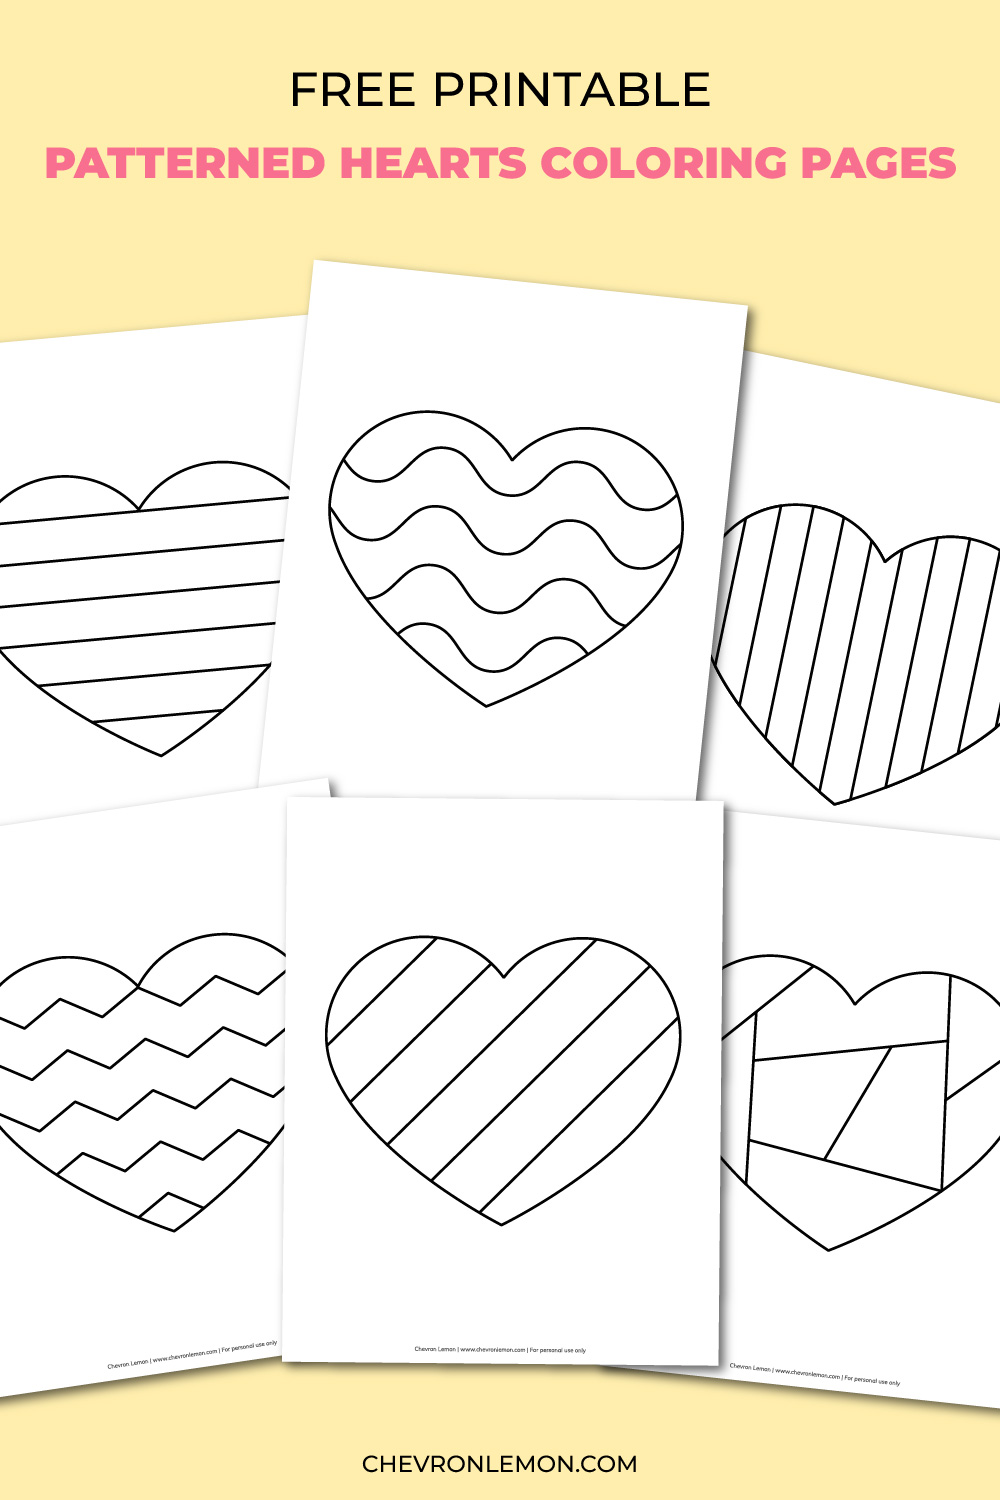 Printable patterned hearts coloring pages